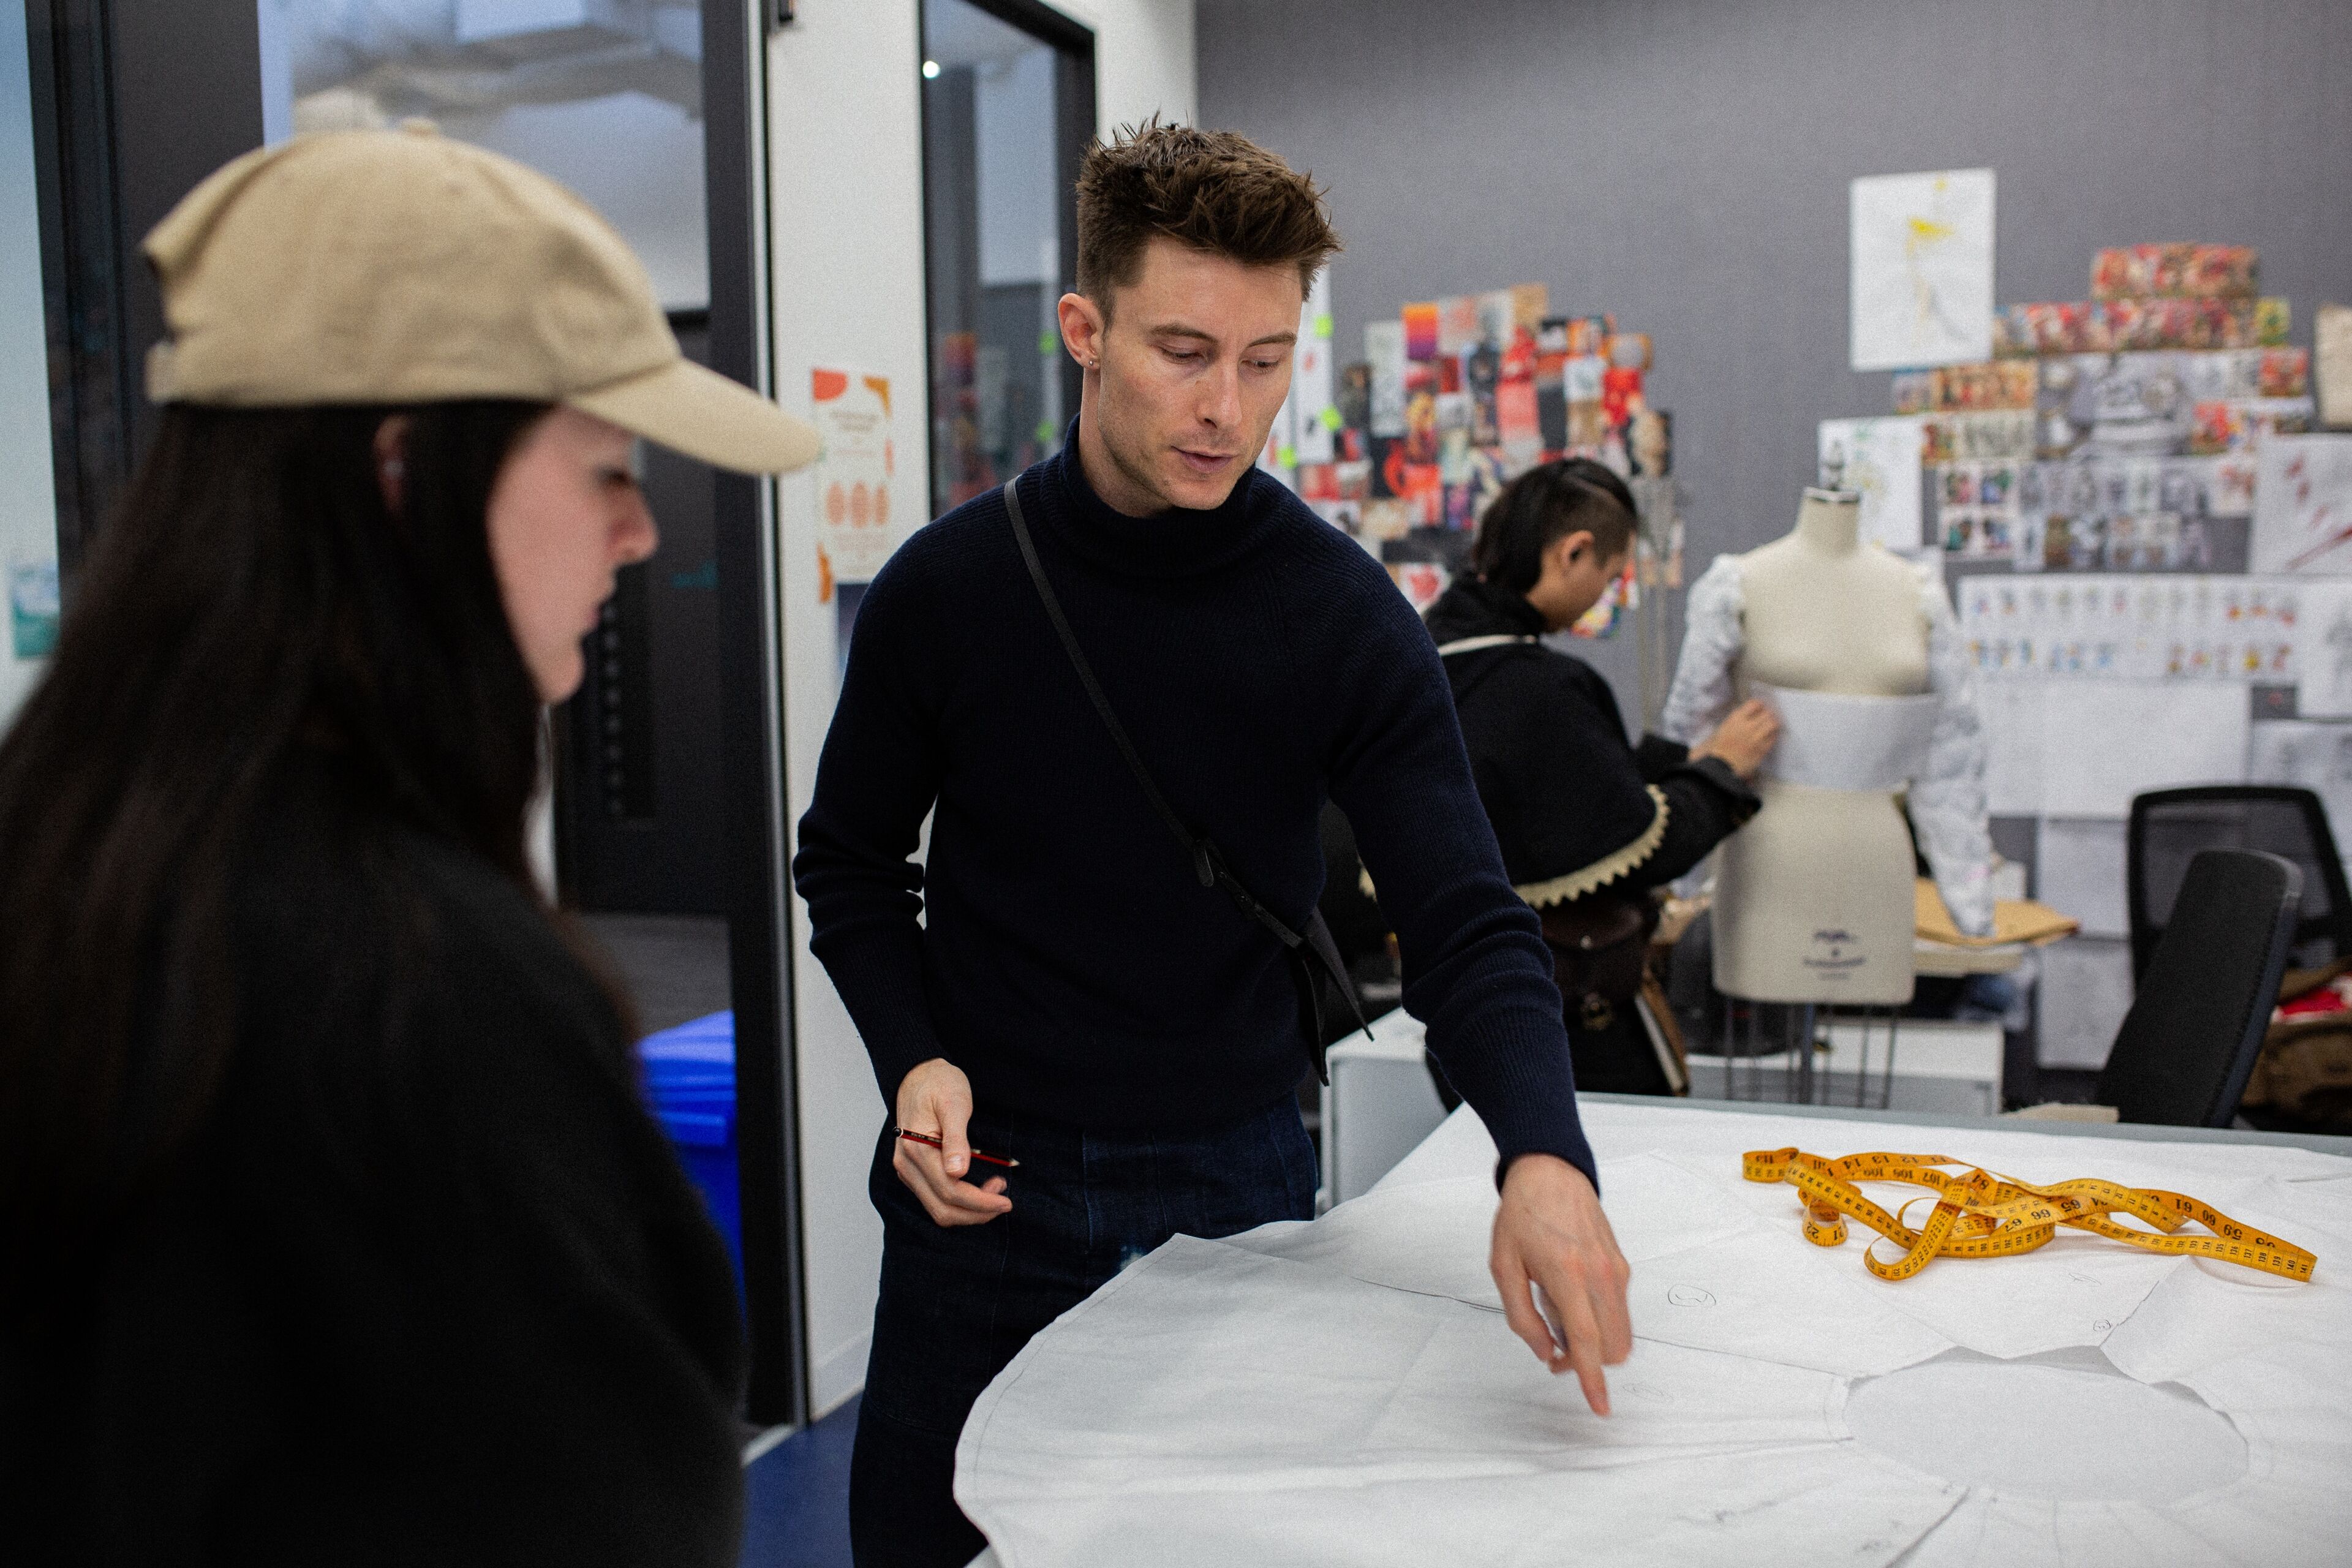 A focused fashion designer at work, detailing patterns on fabric with a mannequin and design sketches in the background.